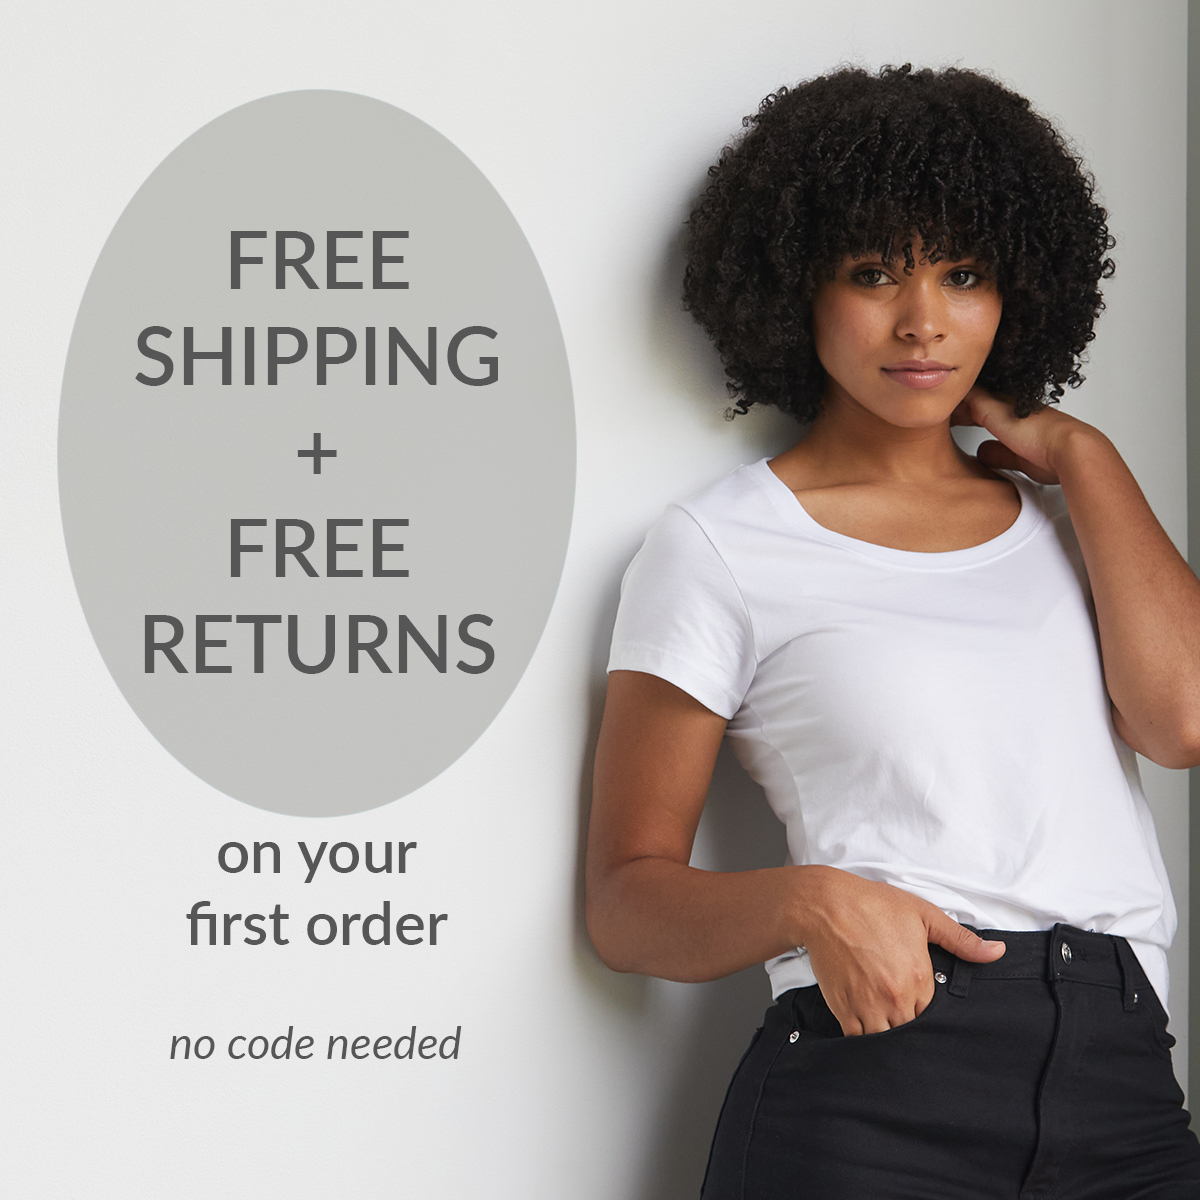 free shipping and free returns shop now